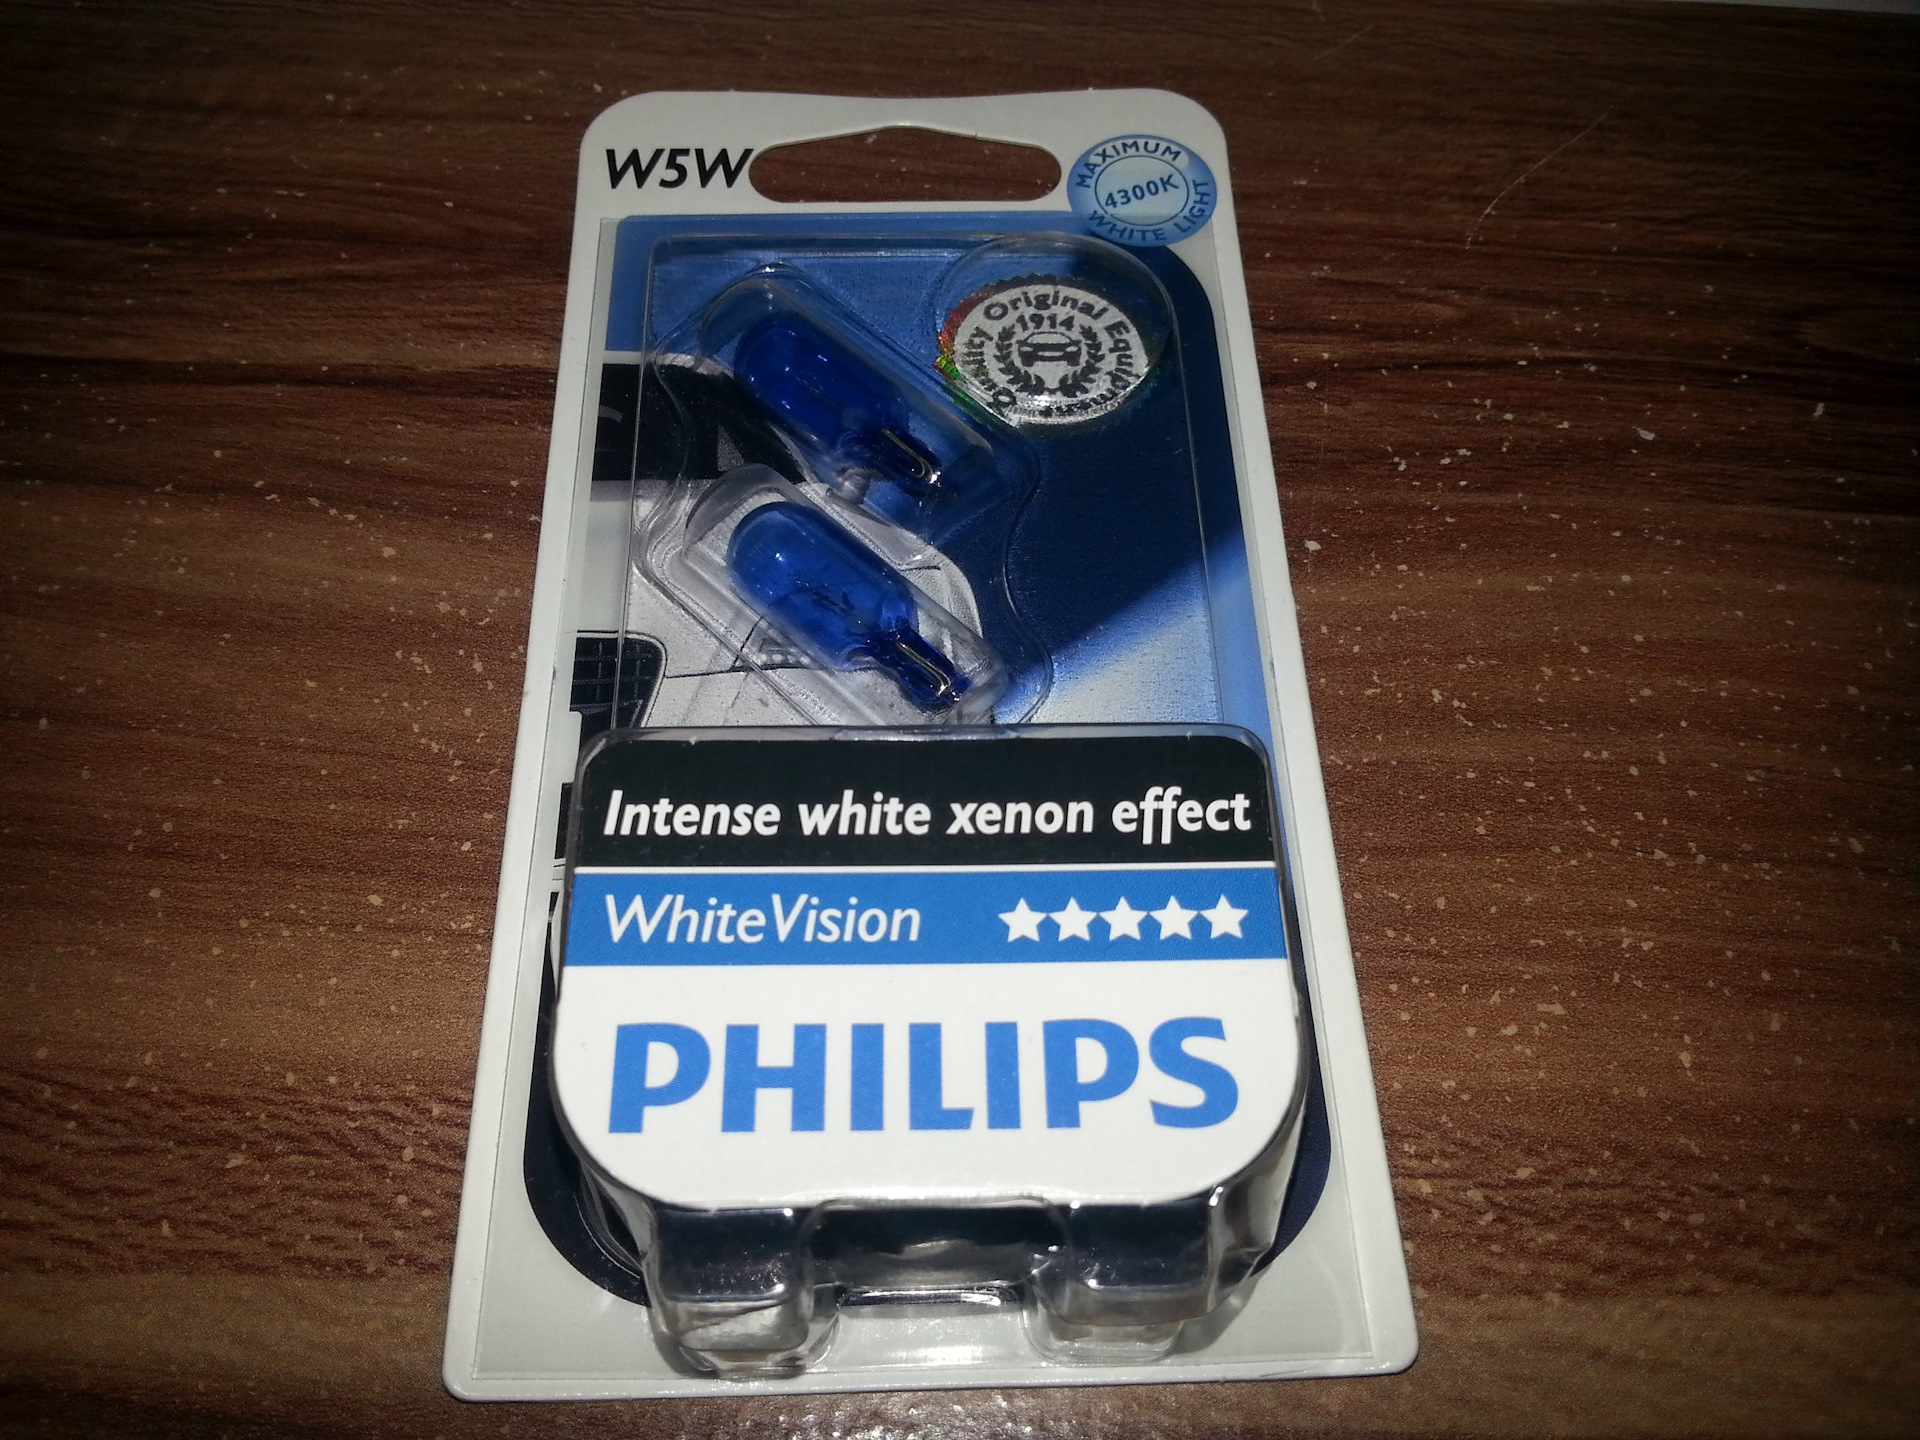 Габариты филипс. Philips w5w led. Габаритные лампы Филипс w5w Vision. Лампочки Philips White Vision Ultra w5w. Philips Blue Vision w5w.